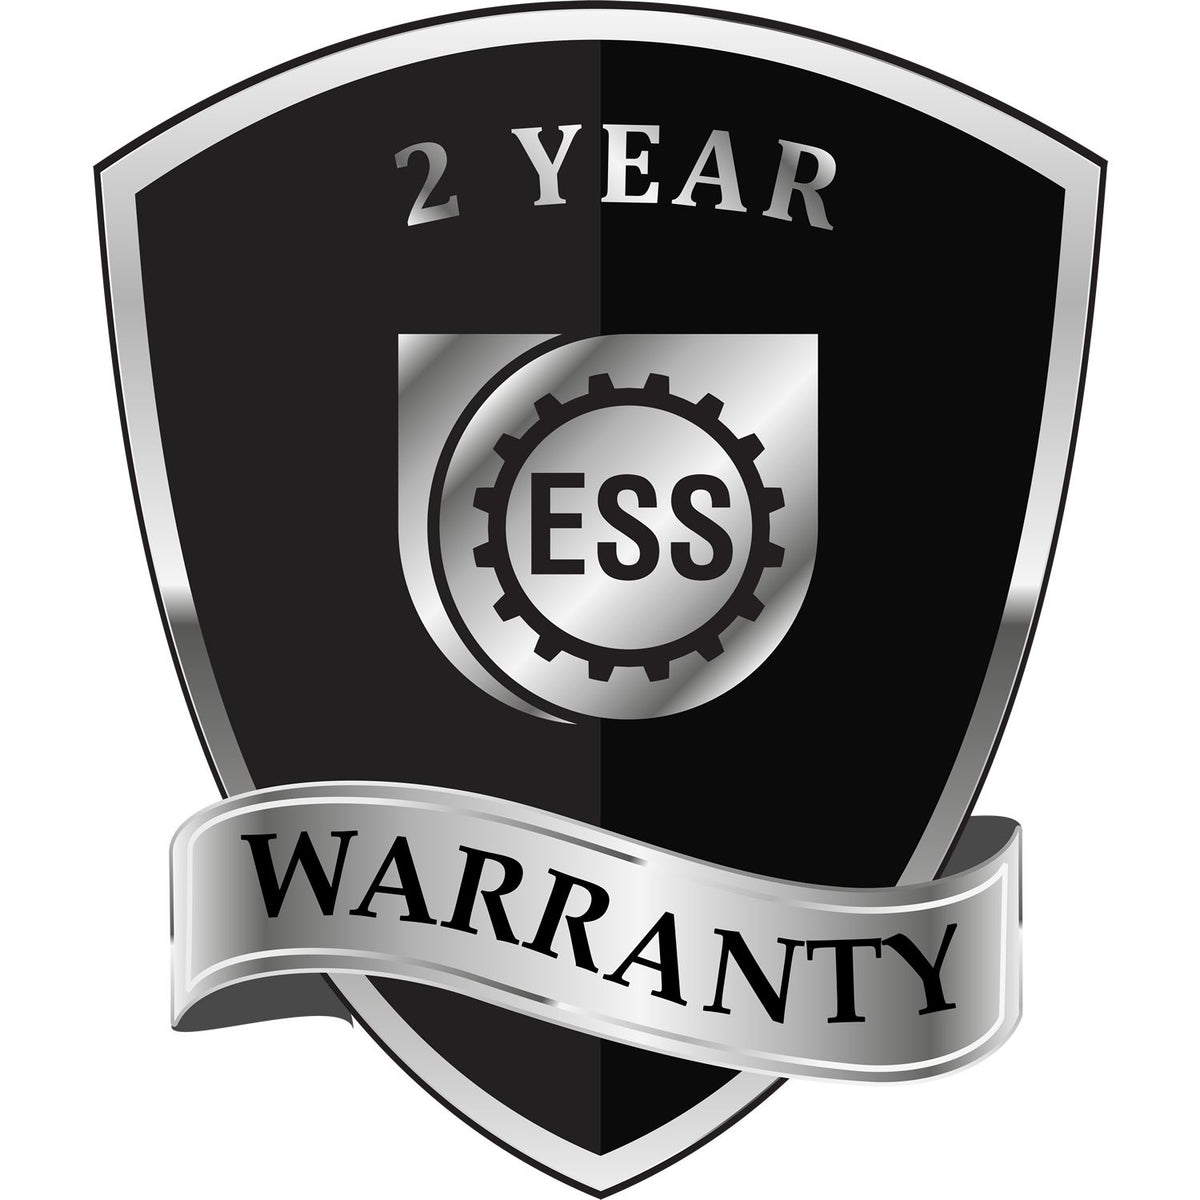 A badge or emblem showing a warranty icon for the Heavy Duty Cast Iron Delaware Architect Embosser